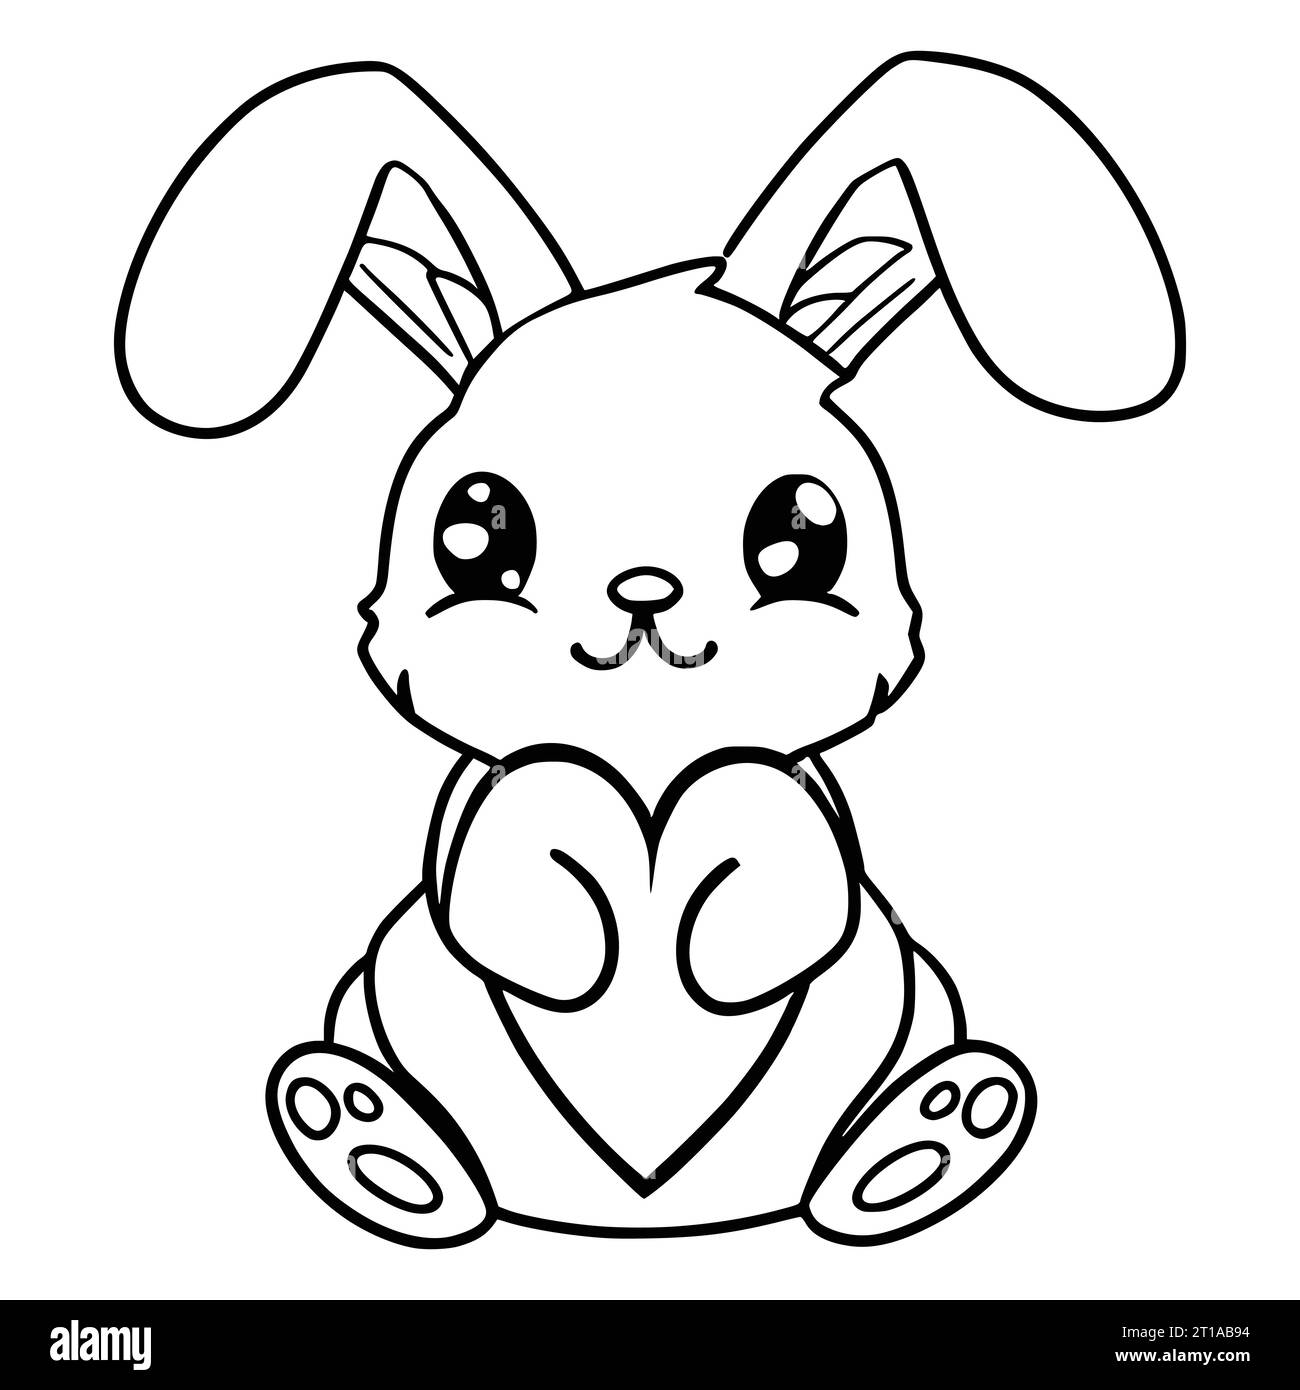 Rabbit and Heart Coloring Pages for Kids and Toddlers Stock Vector